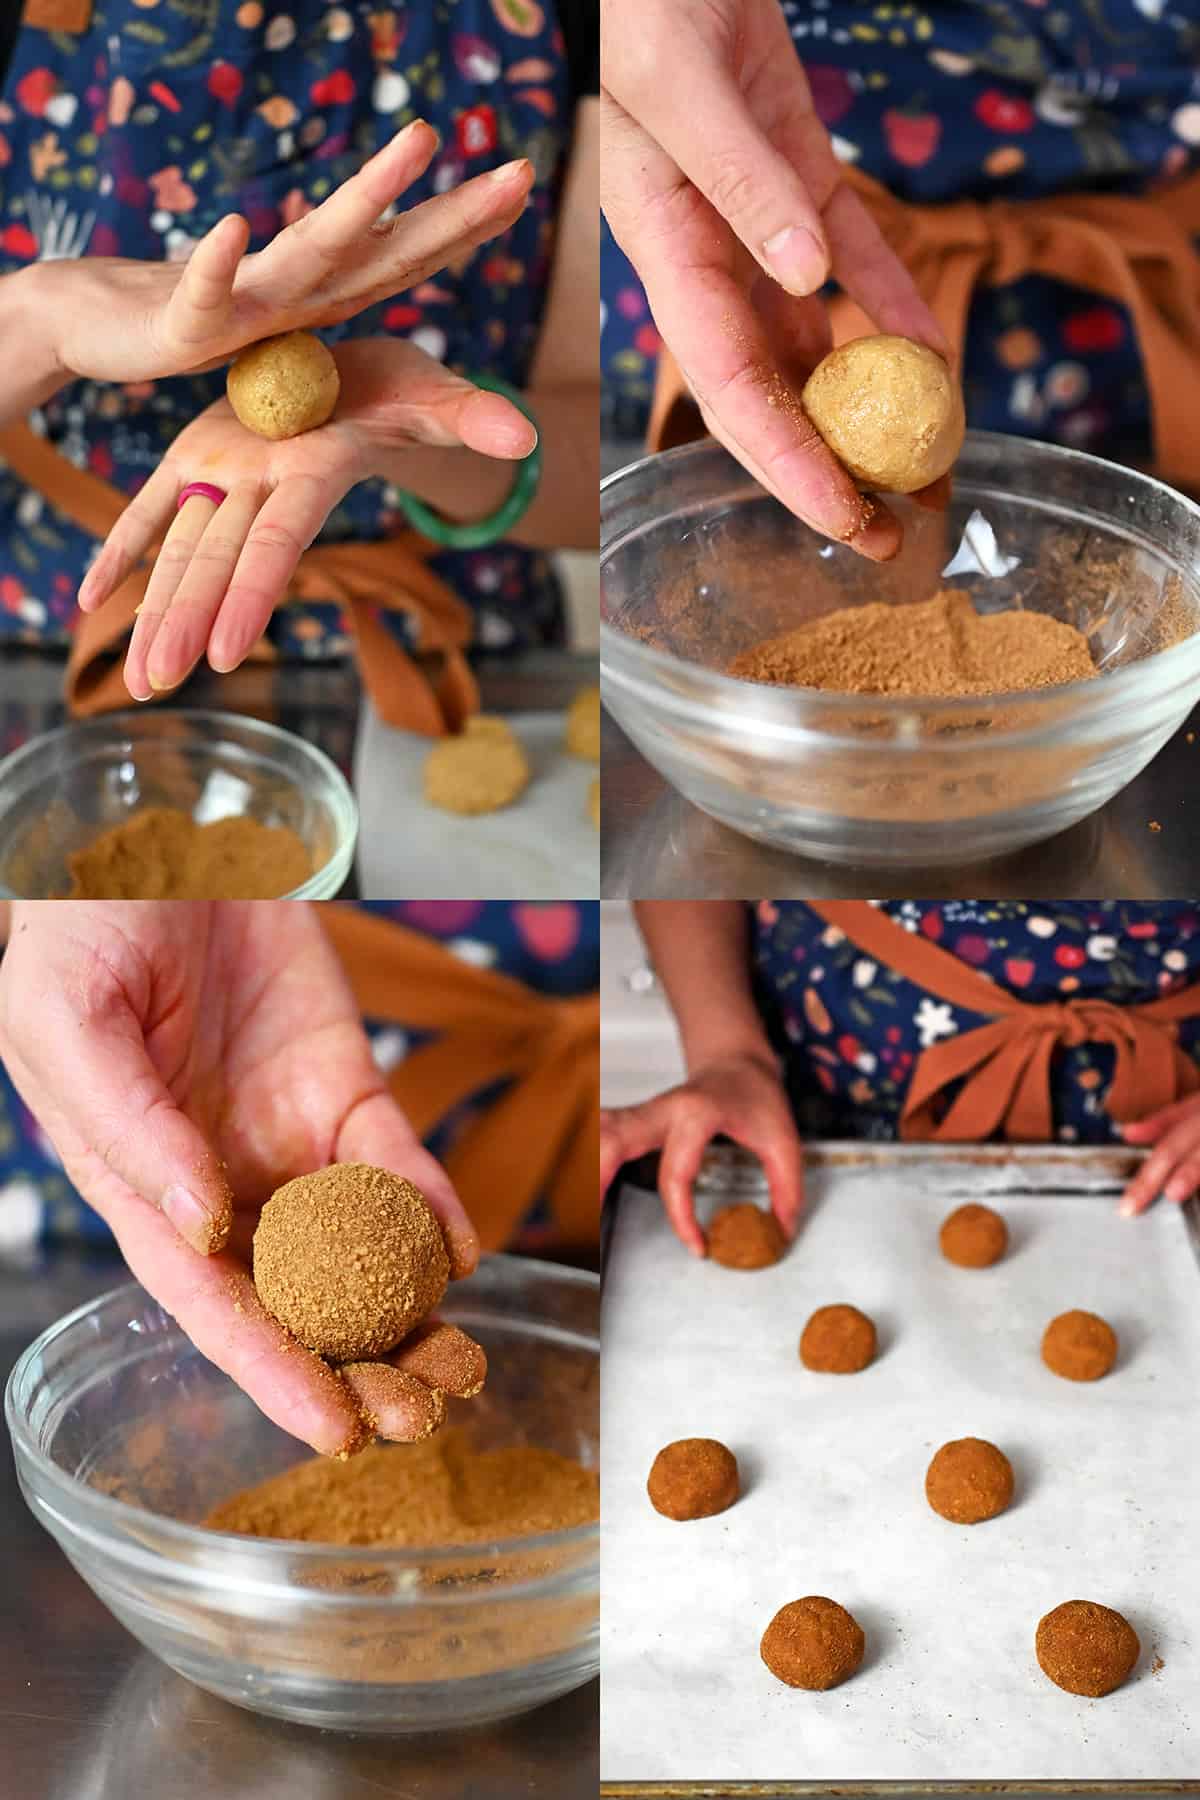 Rolling the snickerdoodle dough into balls, coating them in cinnamon sugar, and then arranging them in a staggered fashion on a parchment lined baking sheet.